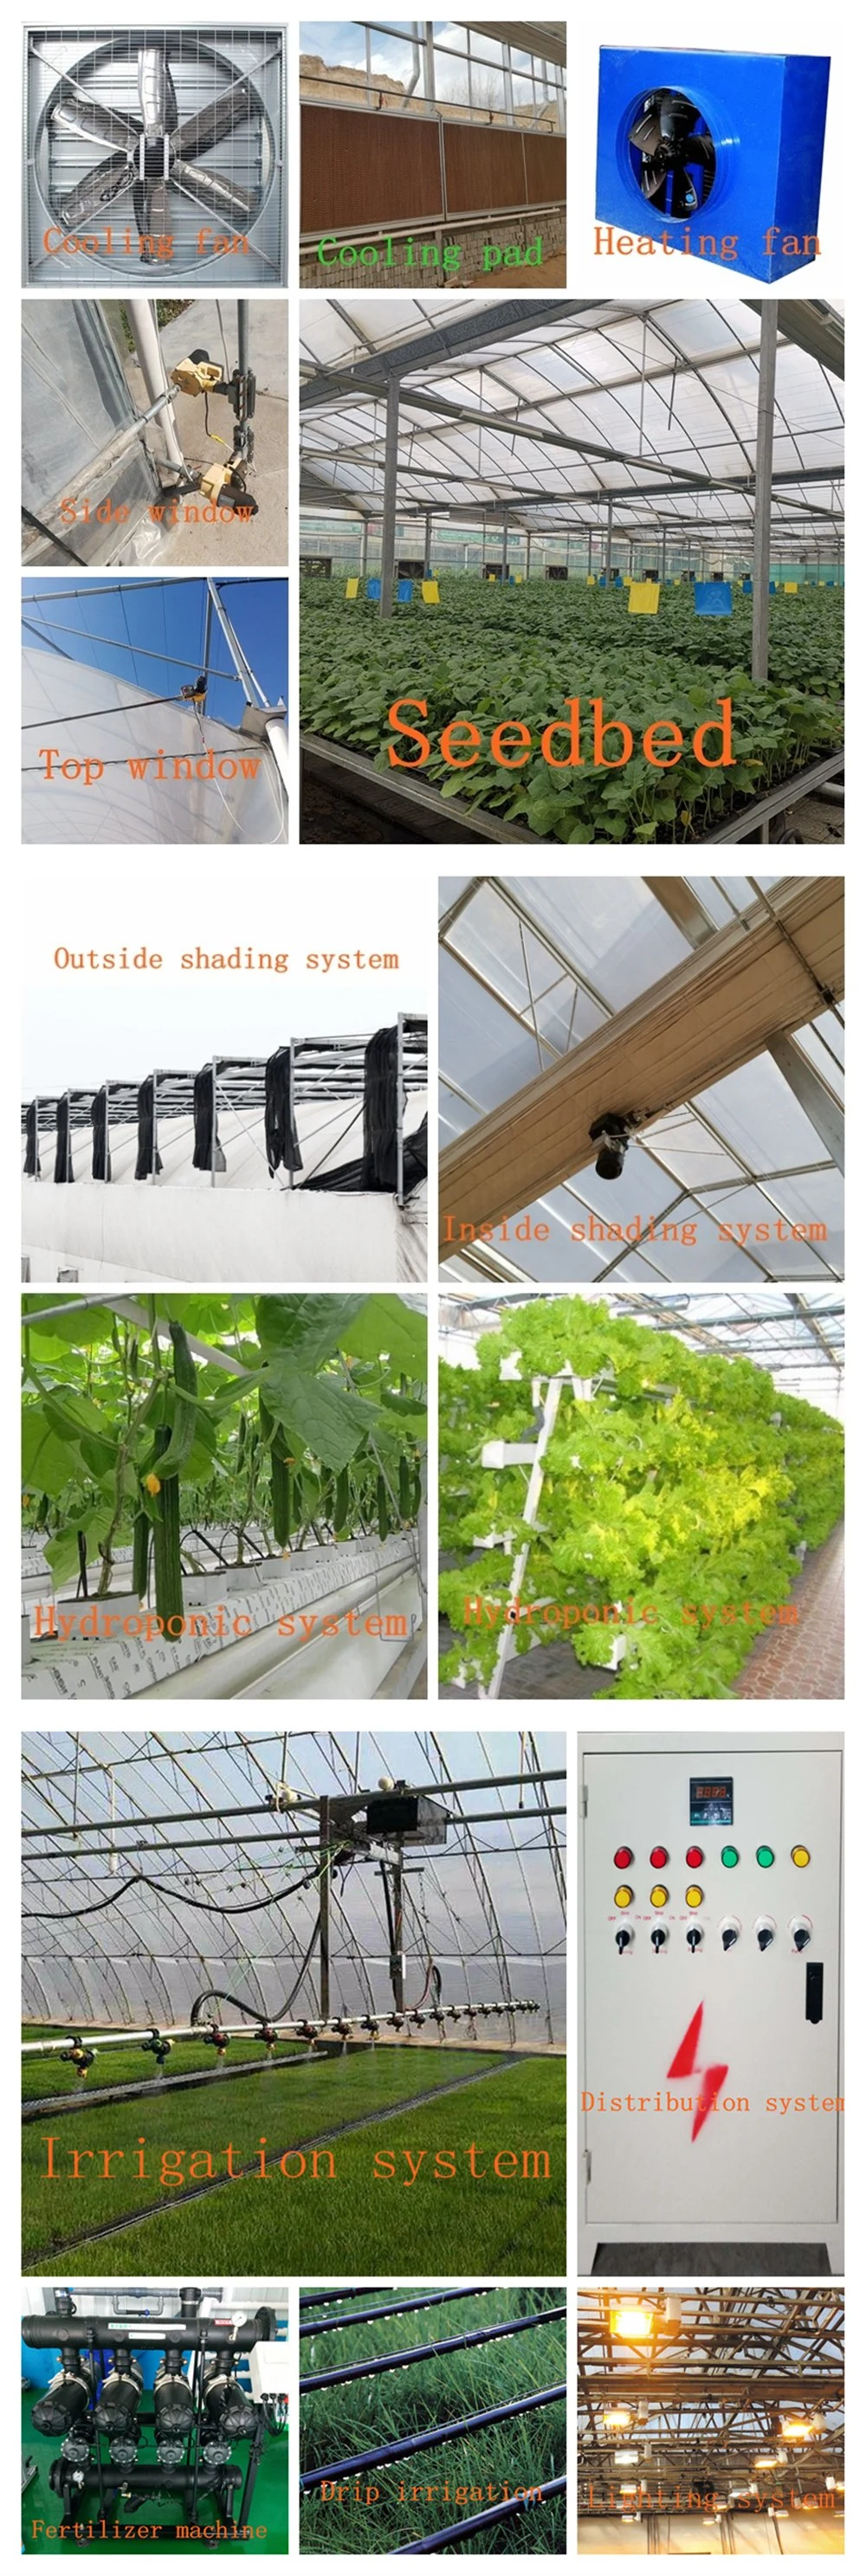 Agricultural Tents/Multi-Span Plastic Film Hydroponics Growing Greenhouse for Tomatoes/Cucumber/Peppers/Sightseeing/Exhibition/Eco-Restaurant